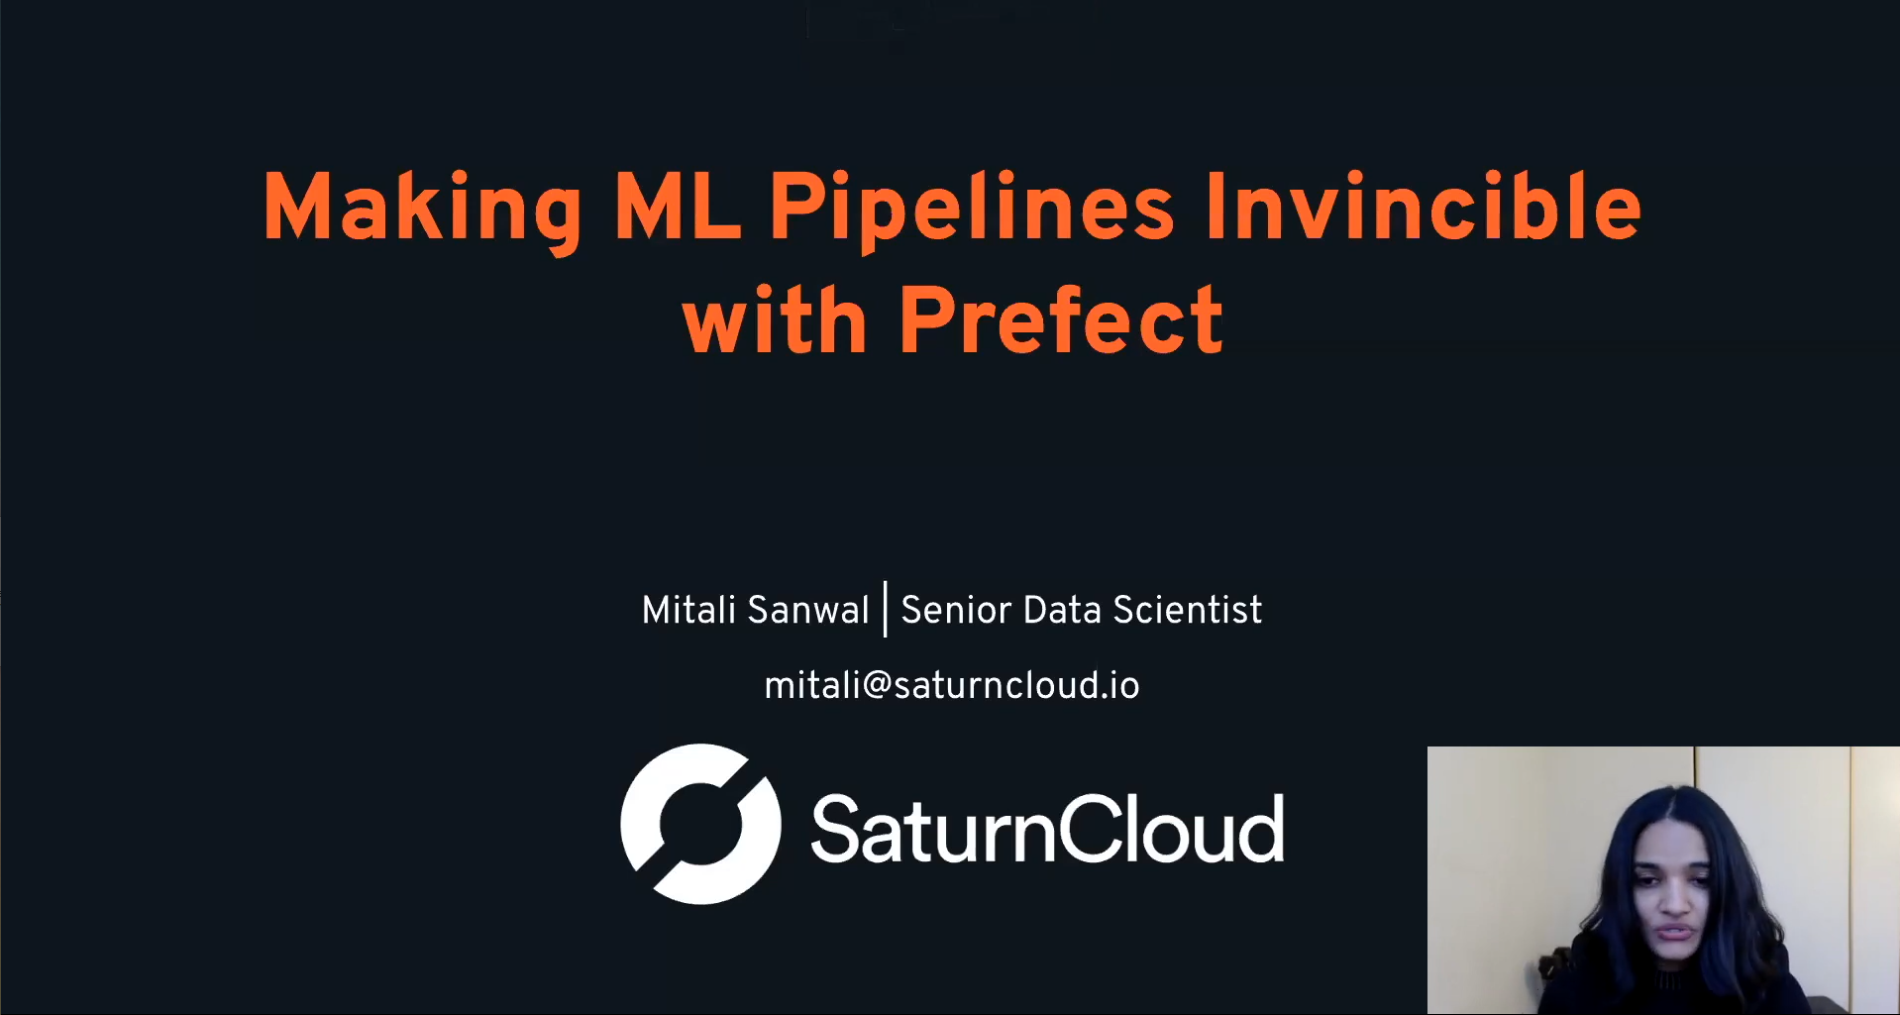 Making ML Pipelines Invincible with Prefect